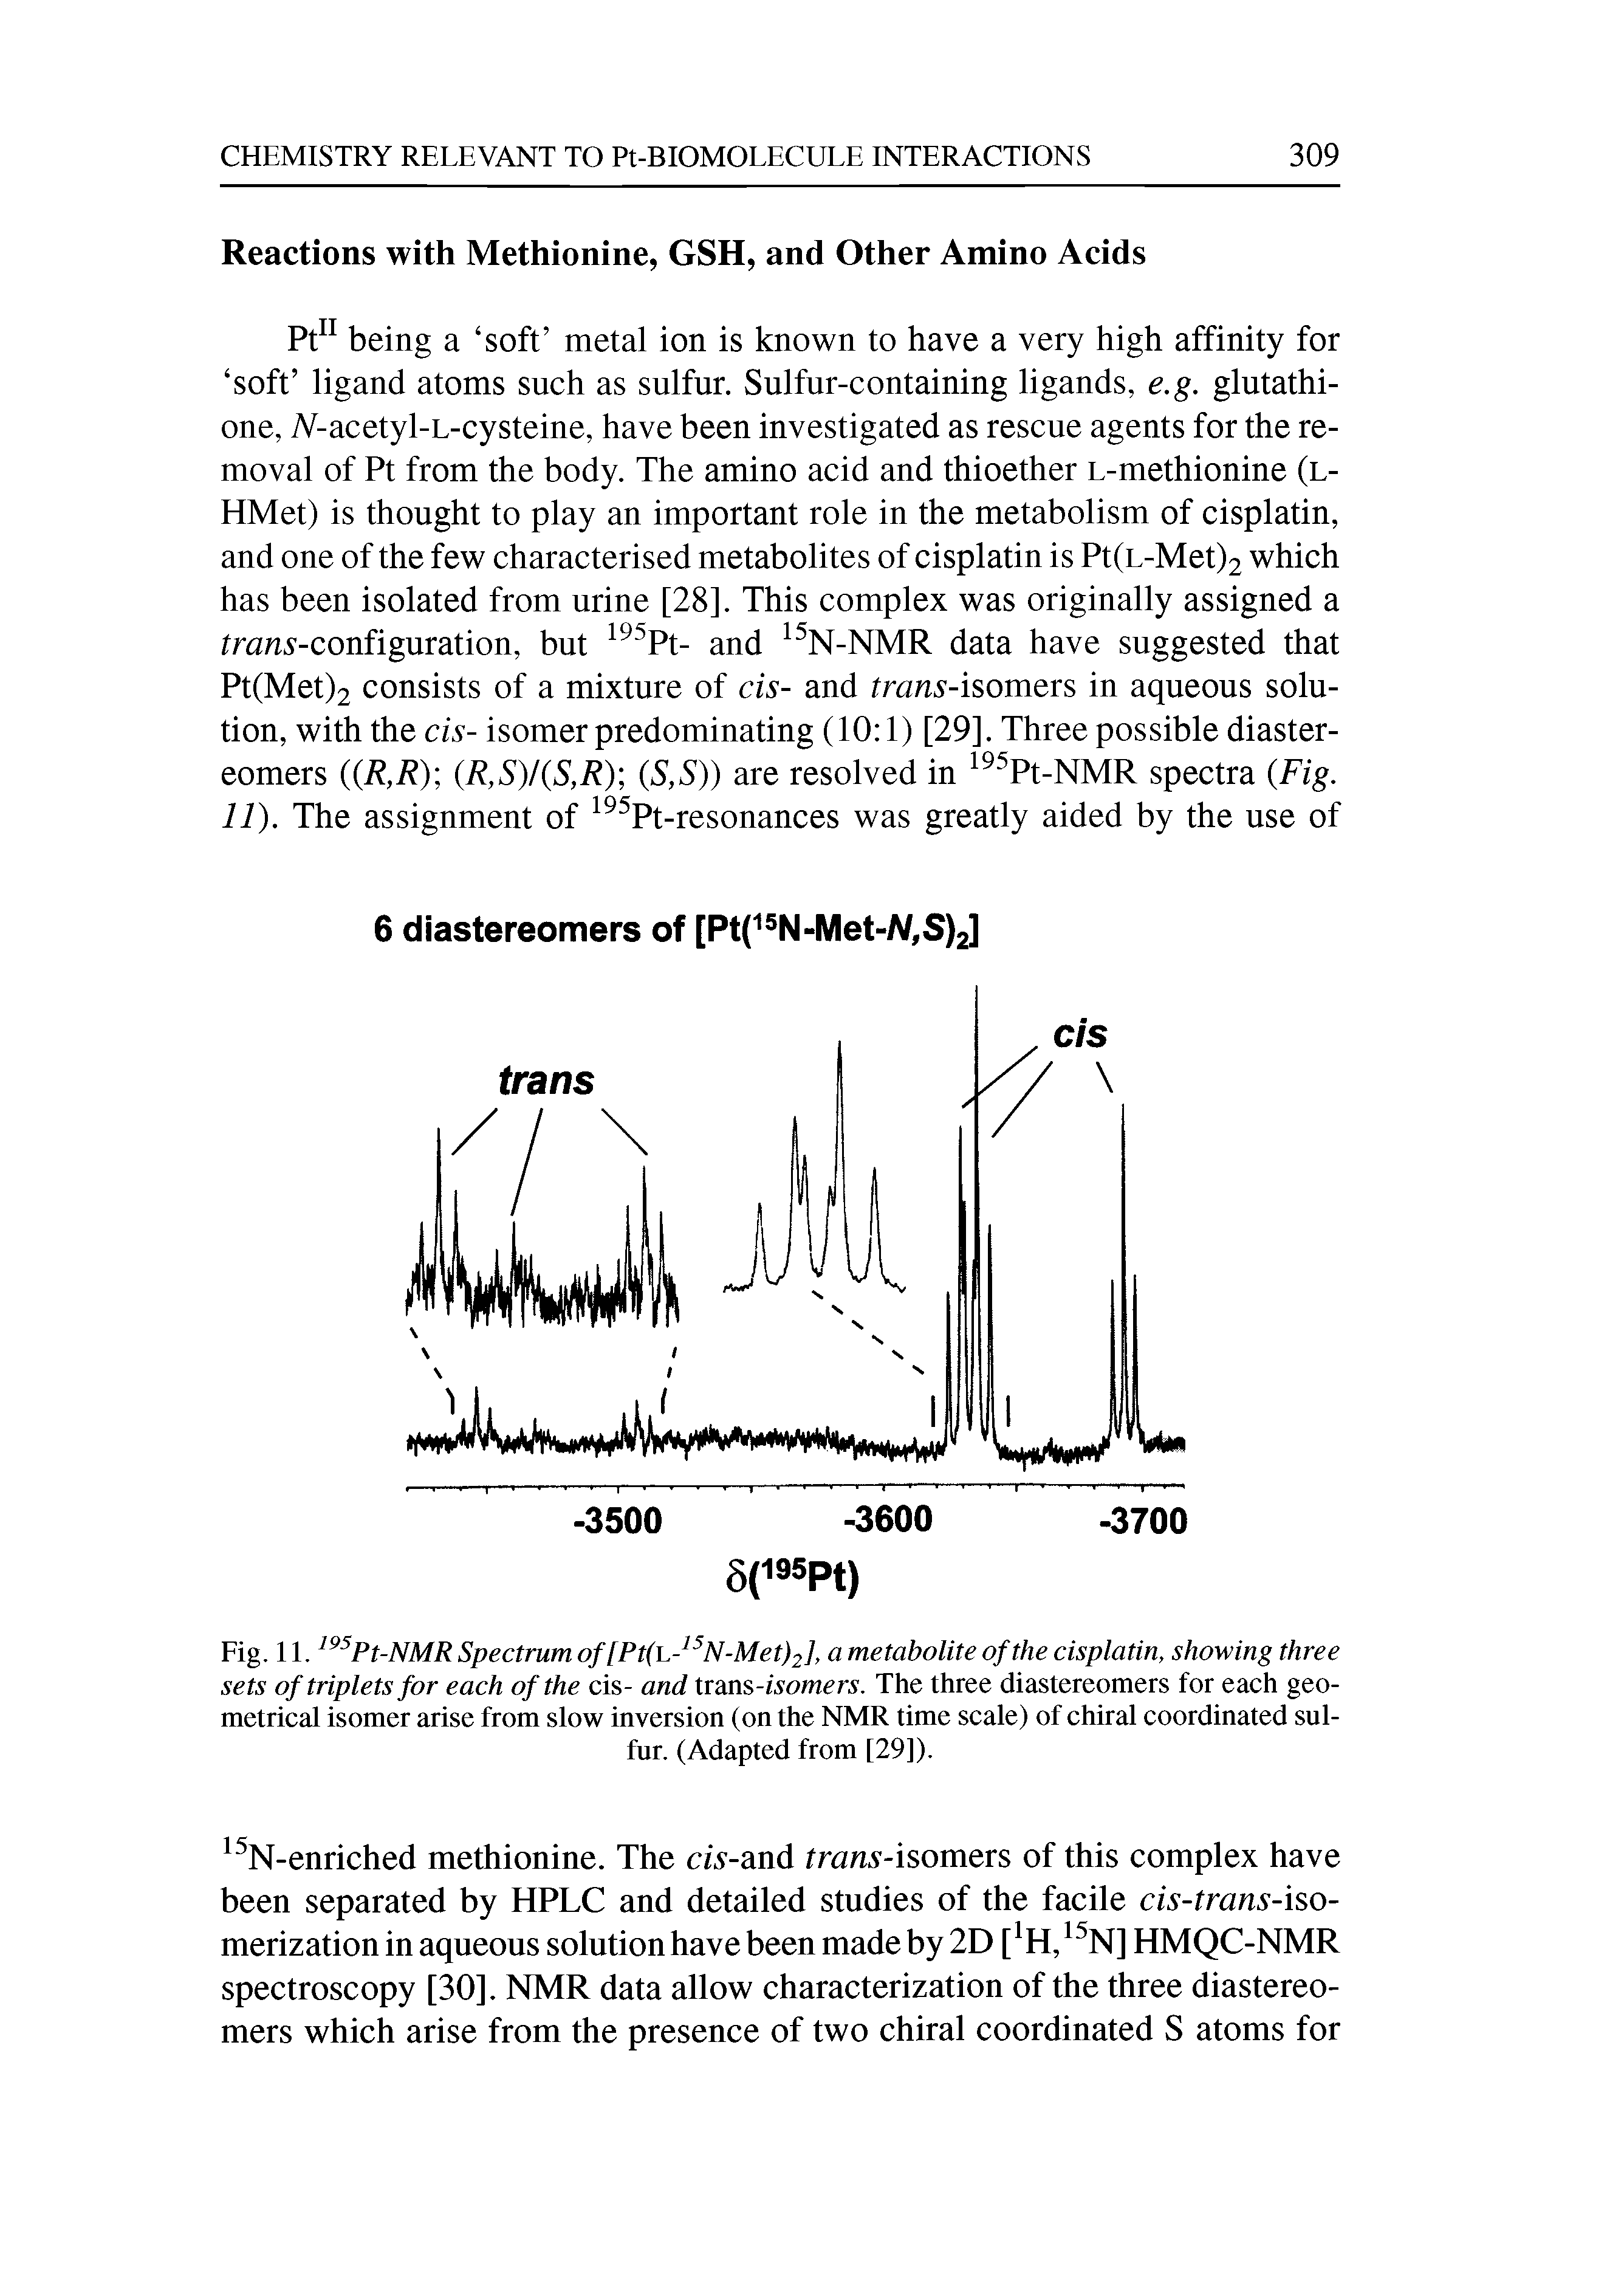 Fig. 11.195Pt-NMR Spectrum of I Pt(, -I5N-Met)2], a metabolite of the cisplatin, showing three sets of triplets for each of the cis- and ir ns-isomers. The three diastereomers for each geometrical isomer arise from slow inversion (on the NMR time scale) of chiral coordinated sulfur. (Adapted from [29]).